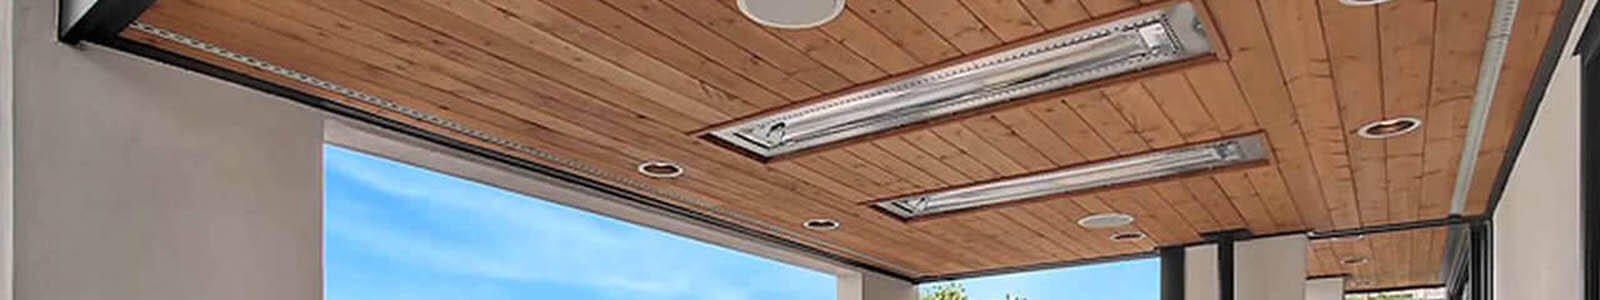 Infratech Heaters & Infratech Patio Heaters Banner